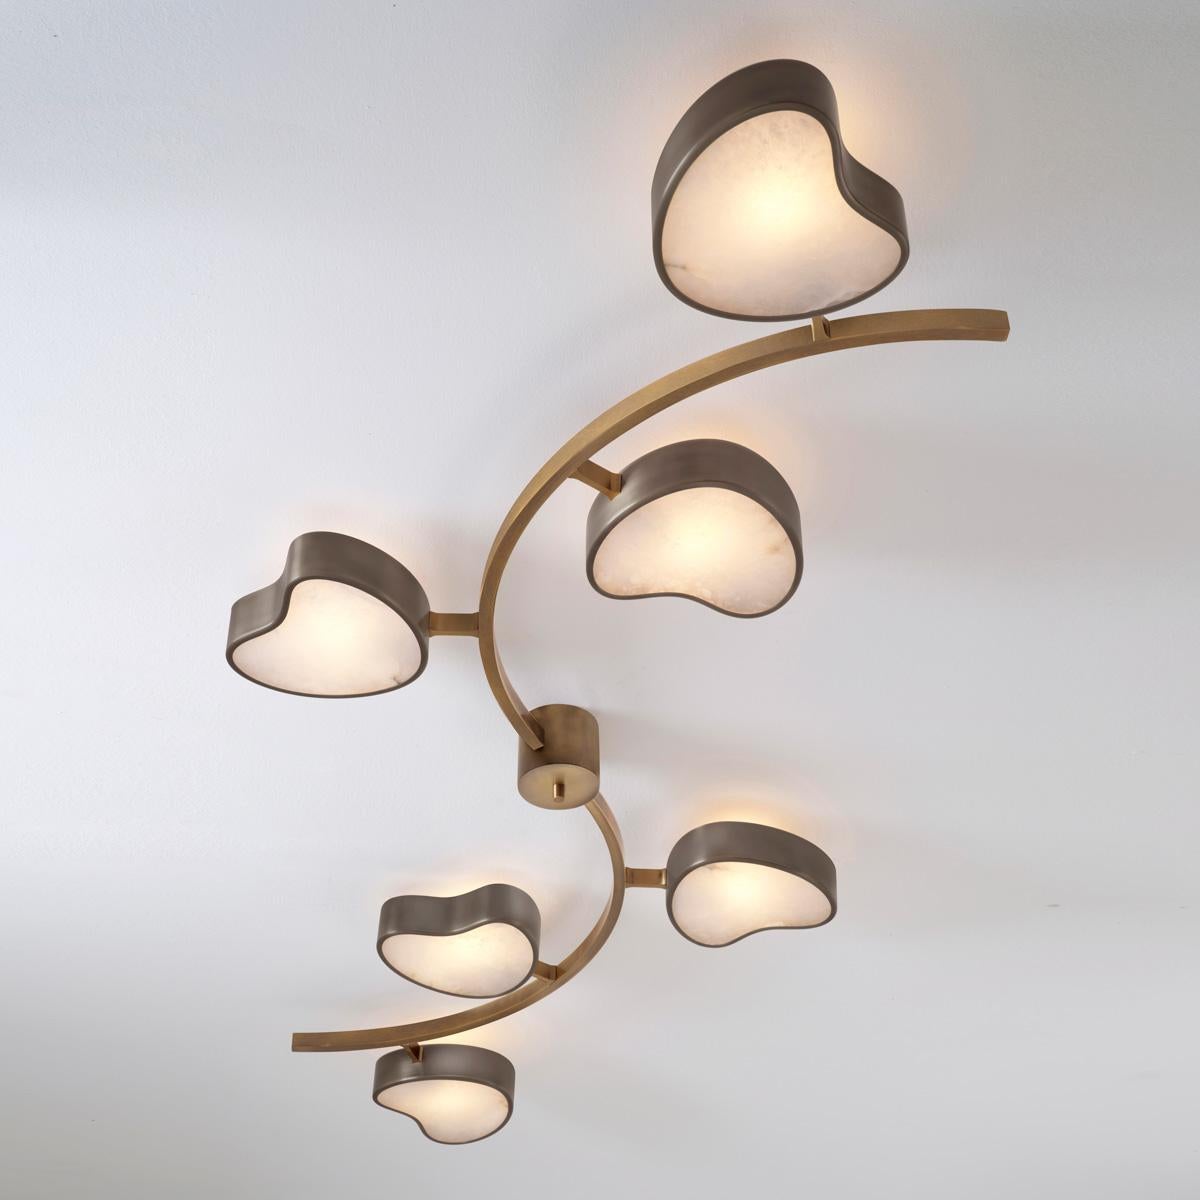 Cuore N.6 Ceiling Light by Gaspare Asaro. Bronze and Satin Brass Finish For Sale 3